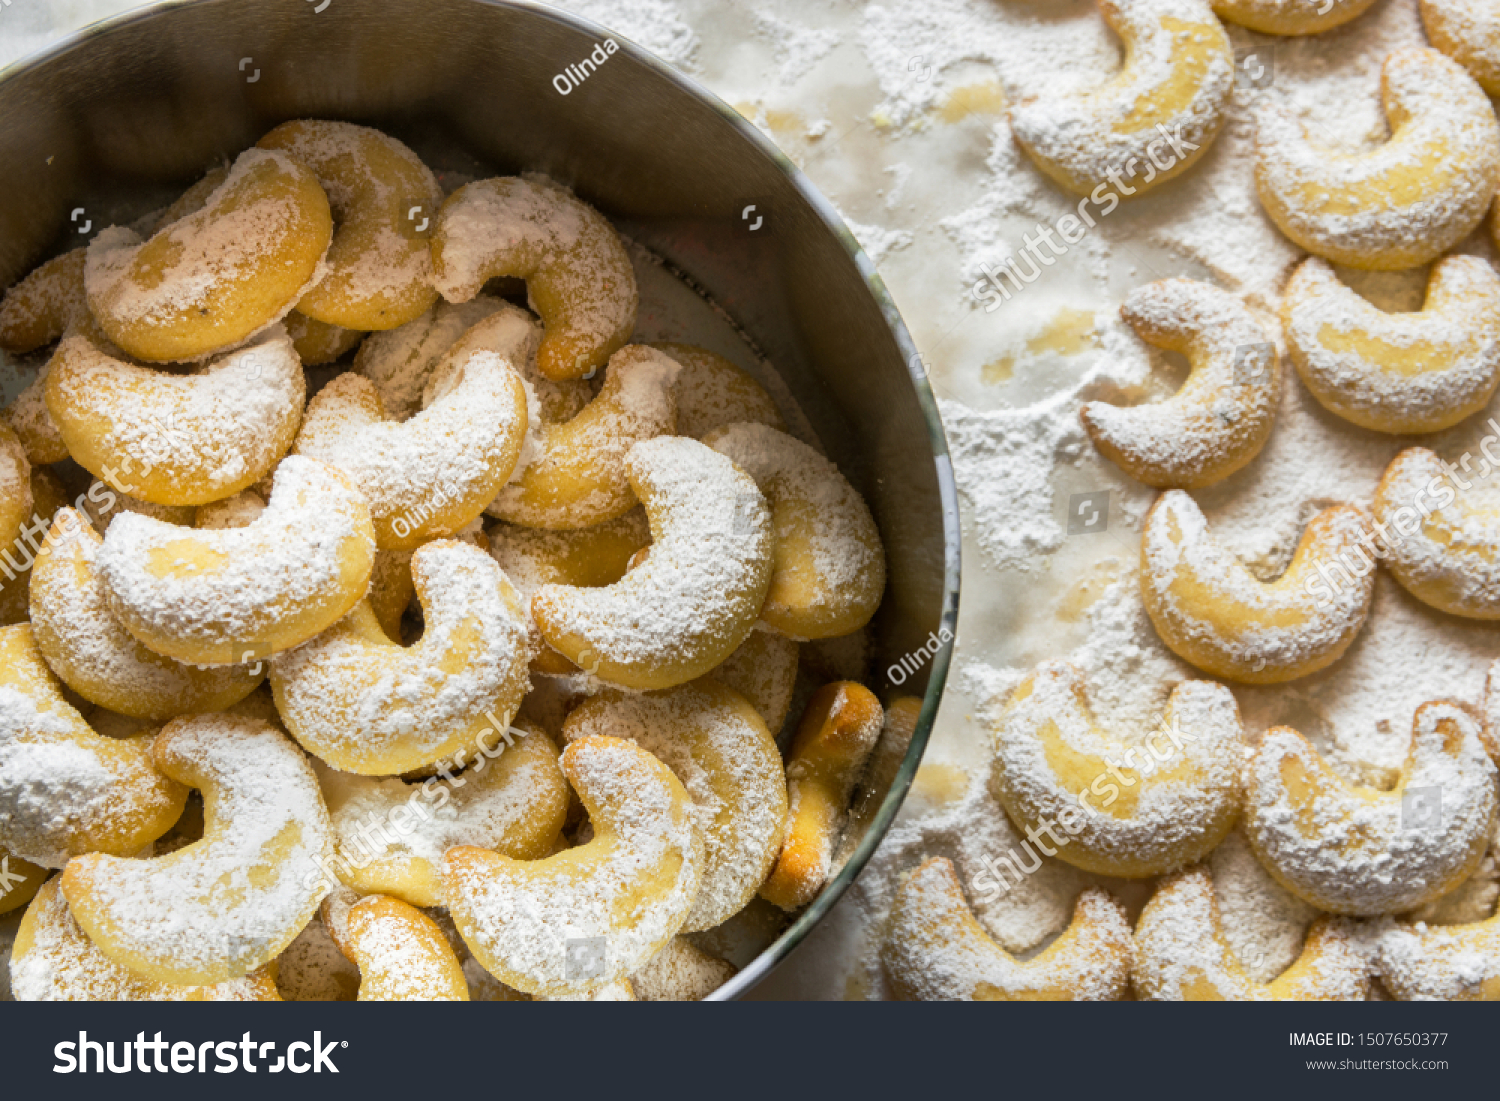 Home Baked German Austrian Traditional Christmas Stock Photo Edit Now 1507650377